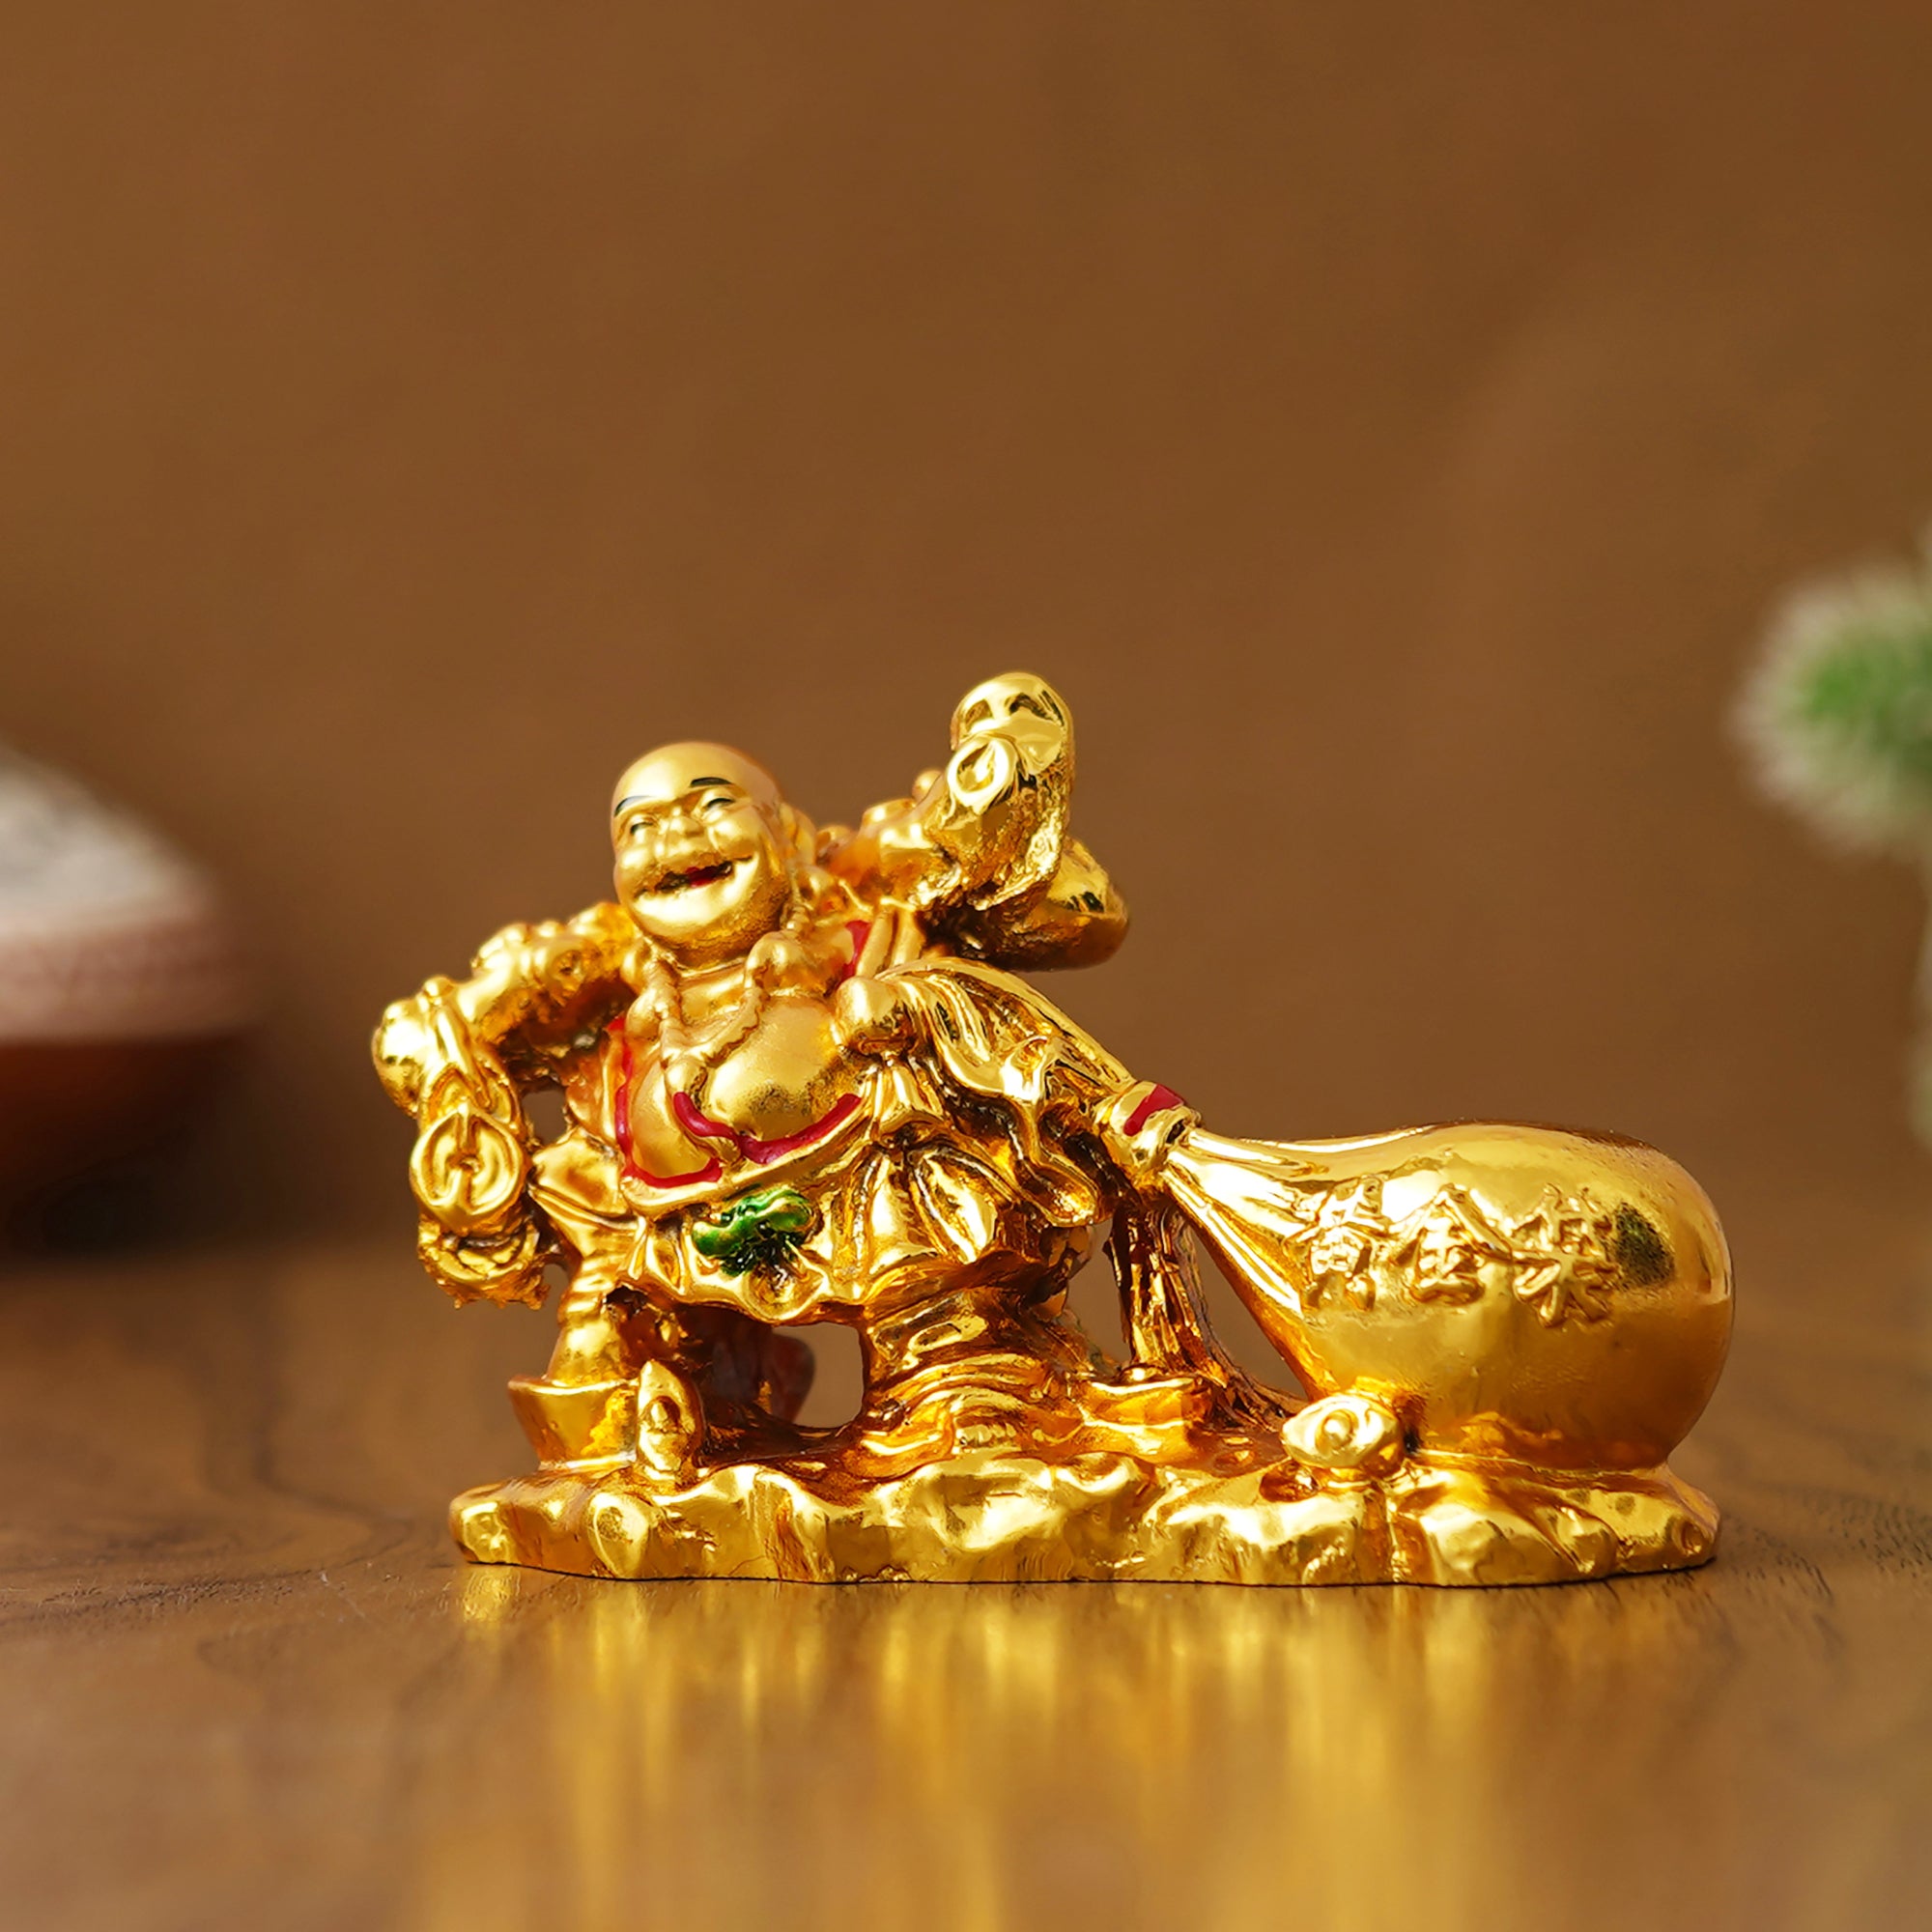 eCraftIndia Golden Polyresin Feng Shui Laughing Buddha Idol with Money Bag For Wealth And Good Luck 5